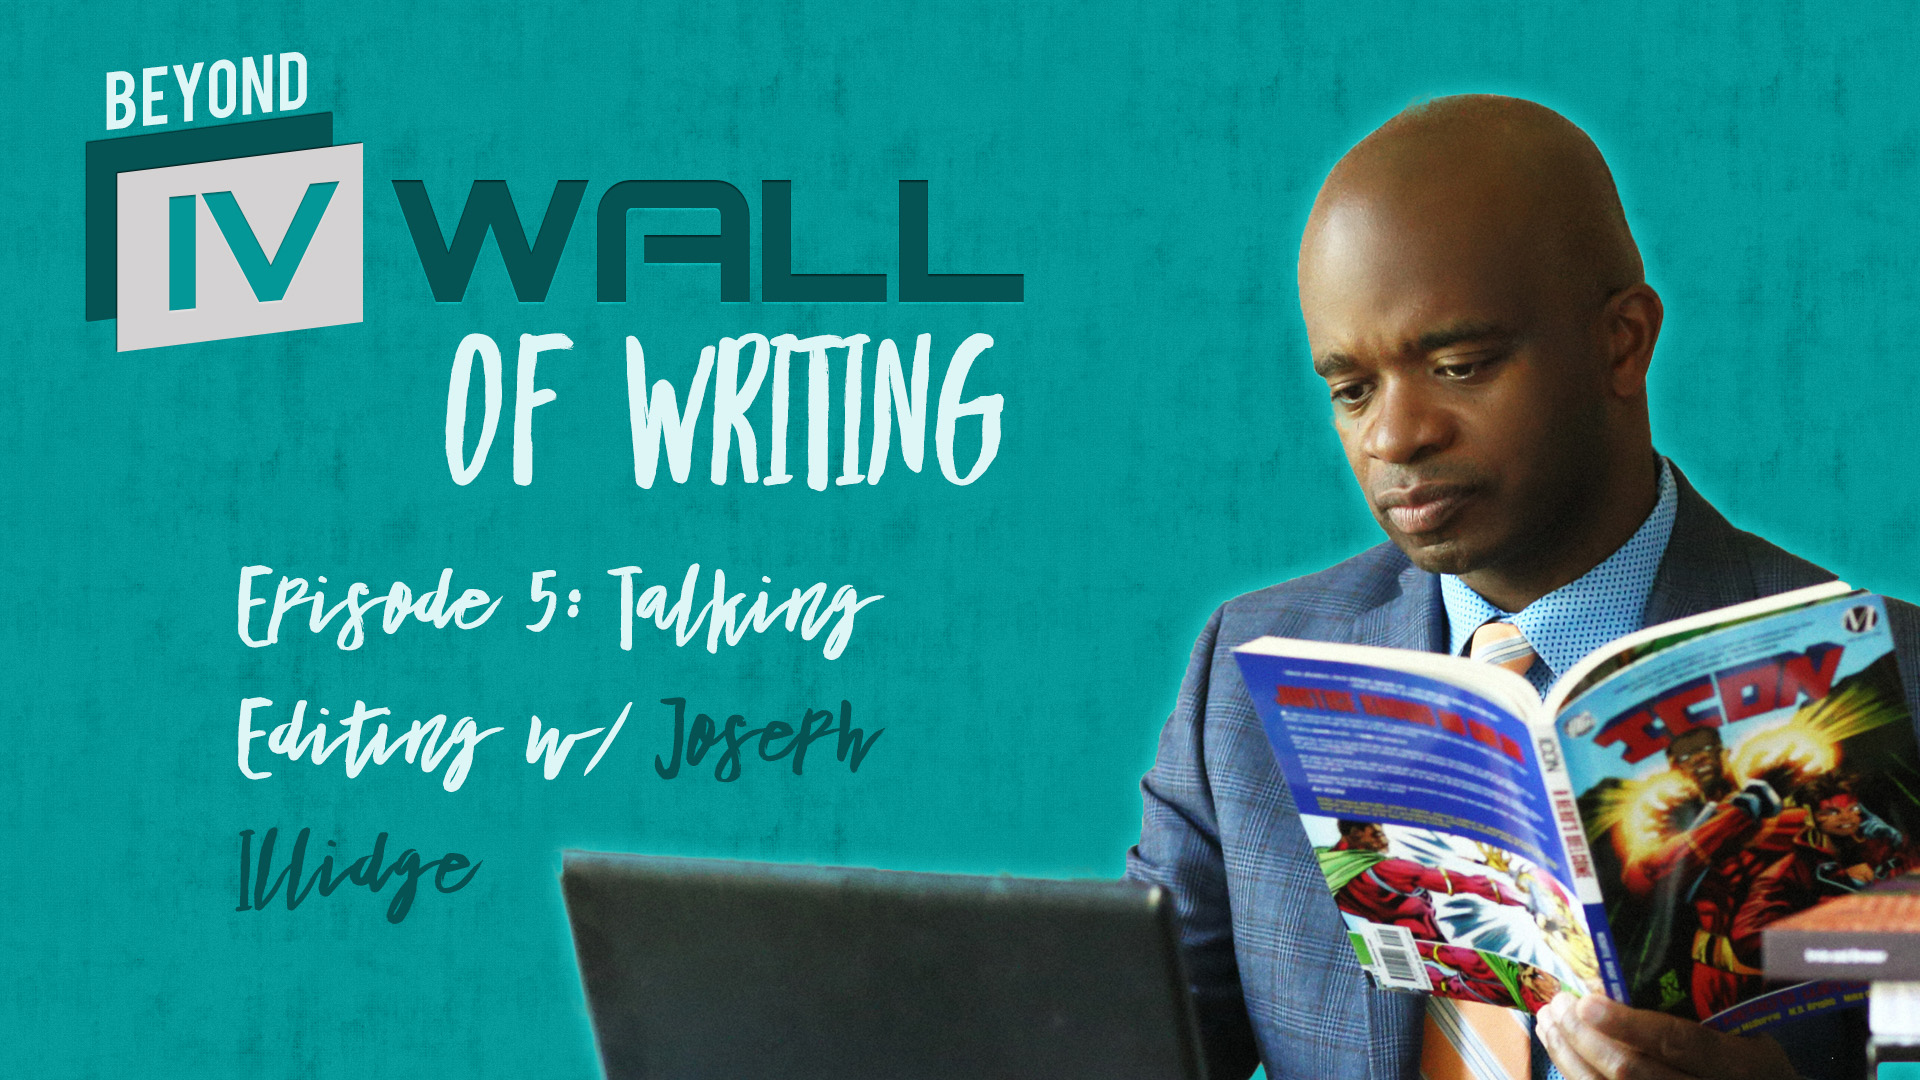 Beyond the IVWall of Writing: Episode 5- Talking Editing with Joseph P. Illidge